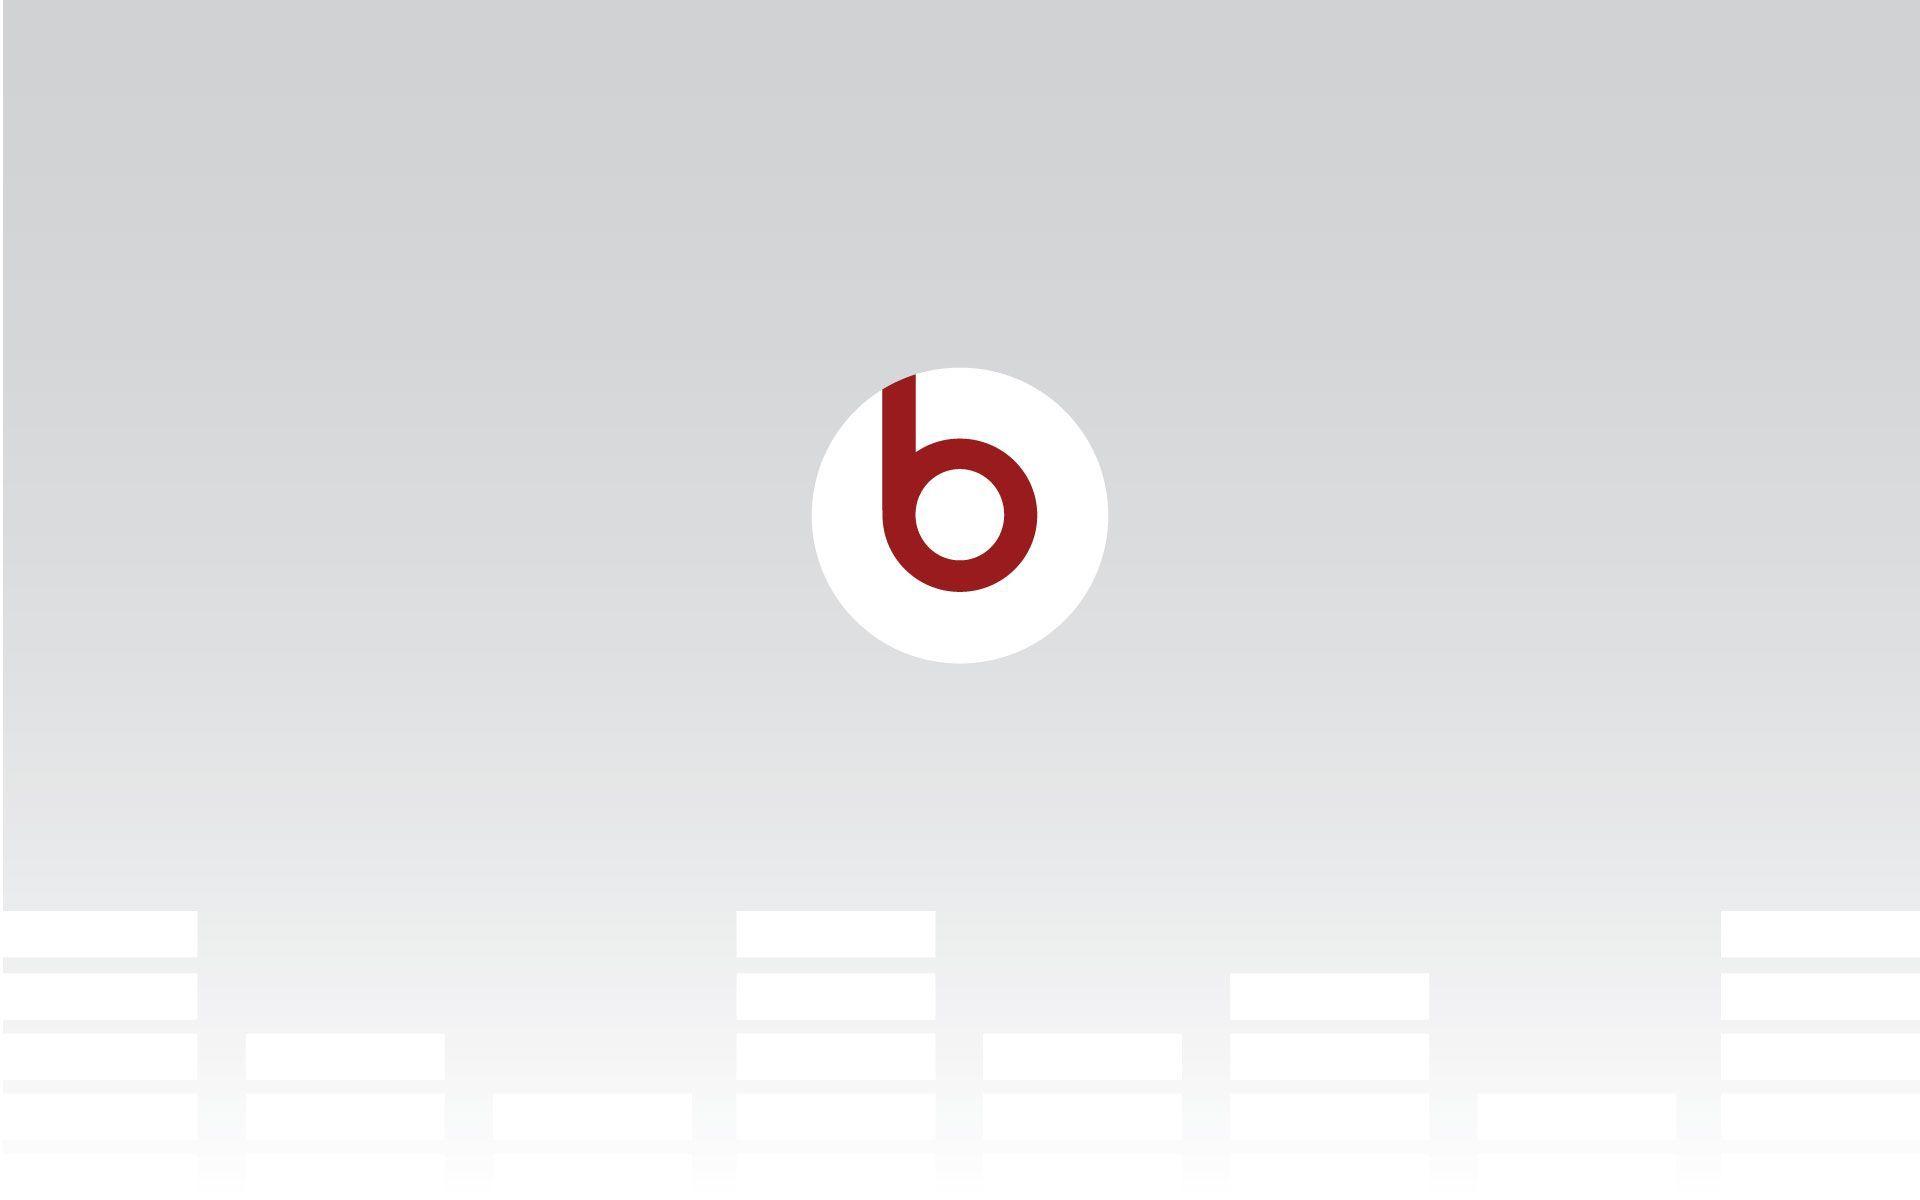 White Beats Logo - Image result for beats by dre logo white. Product Spot. Wallpaper